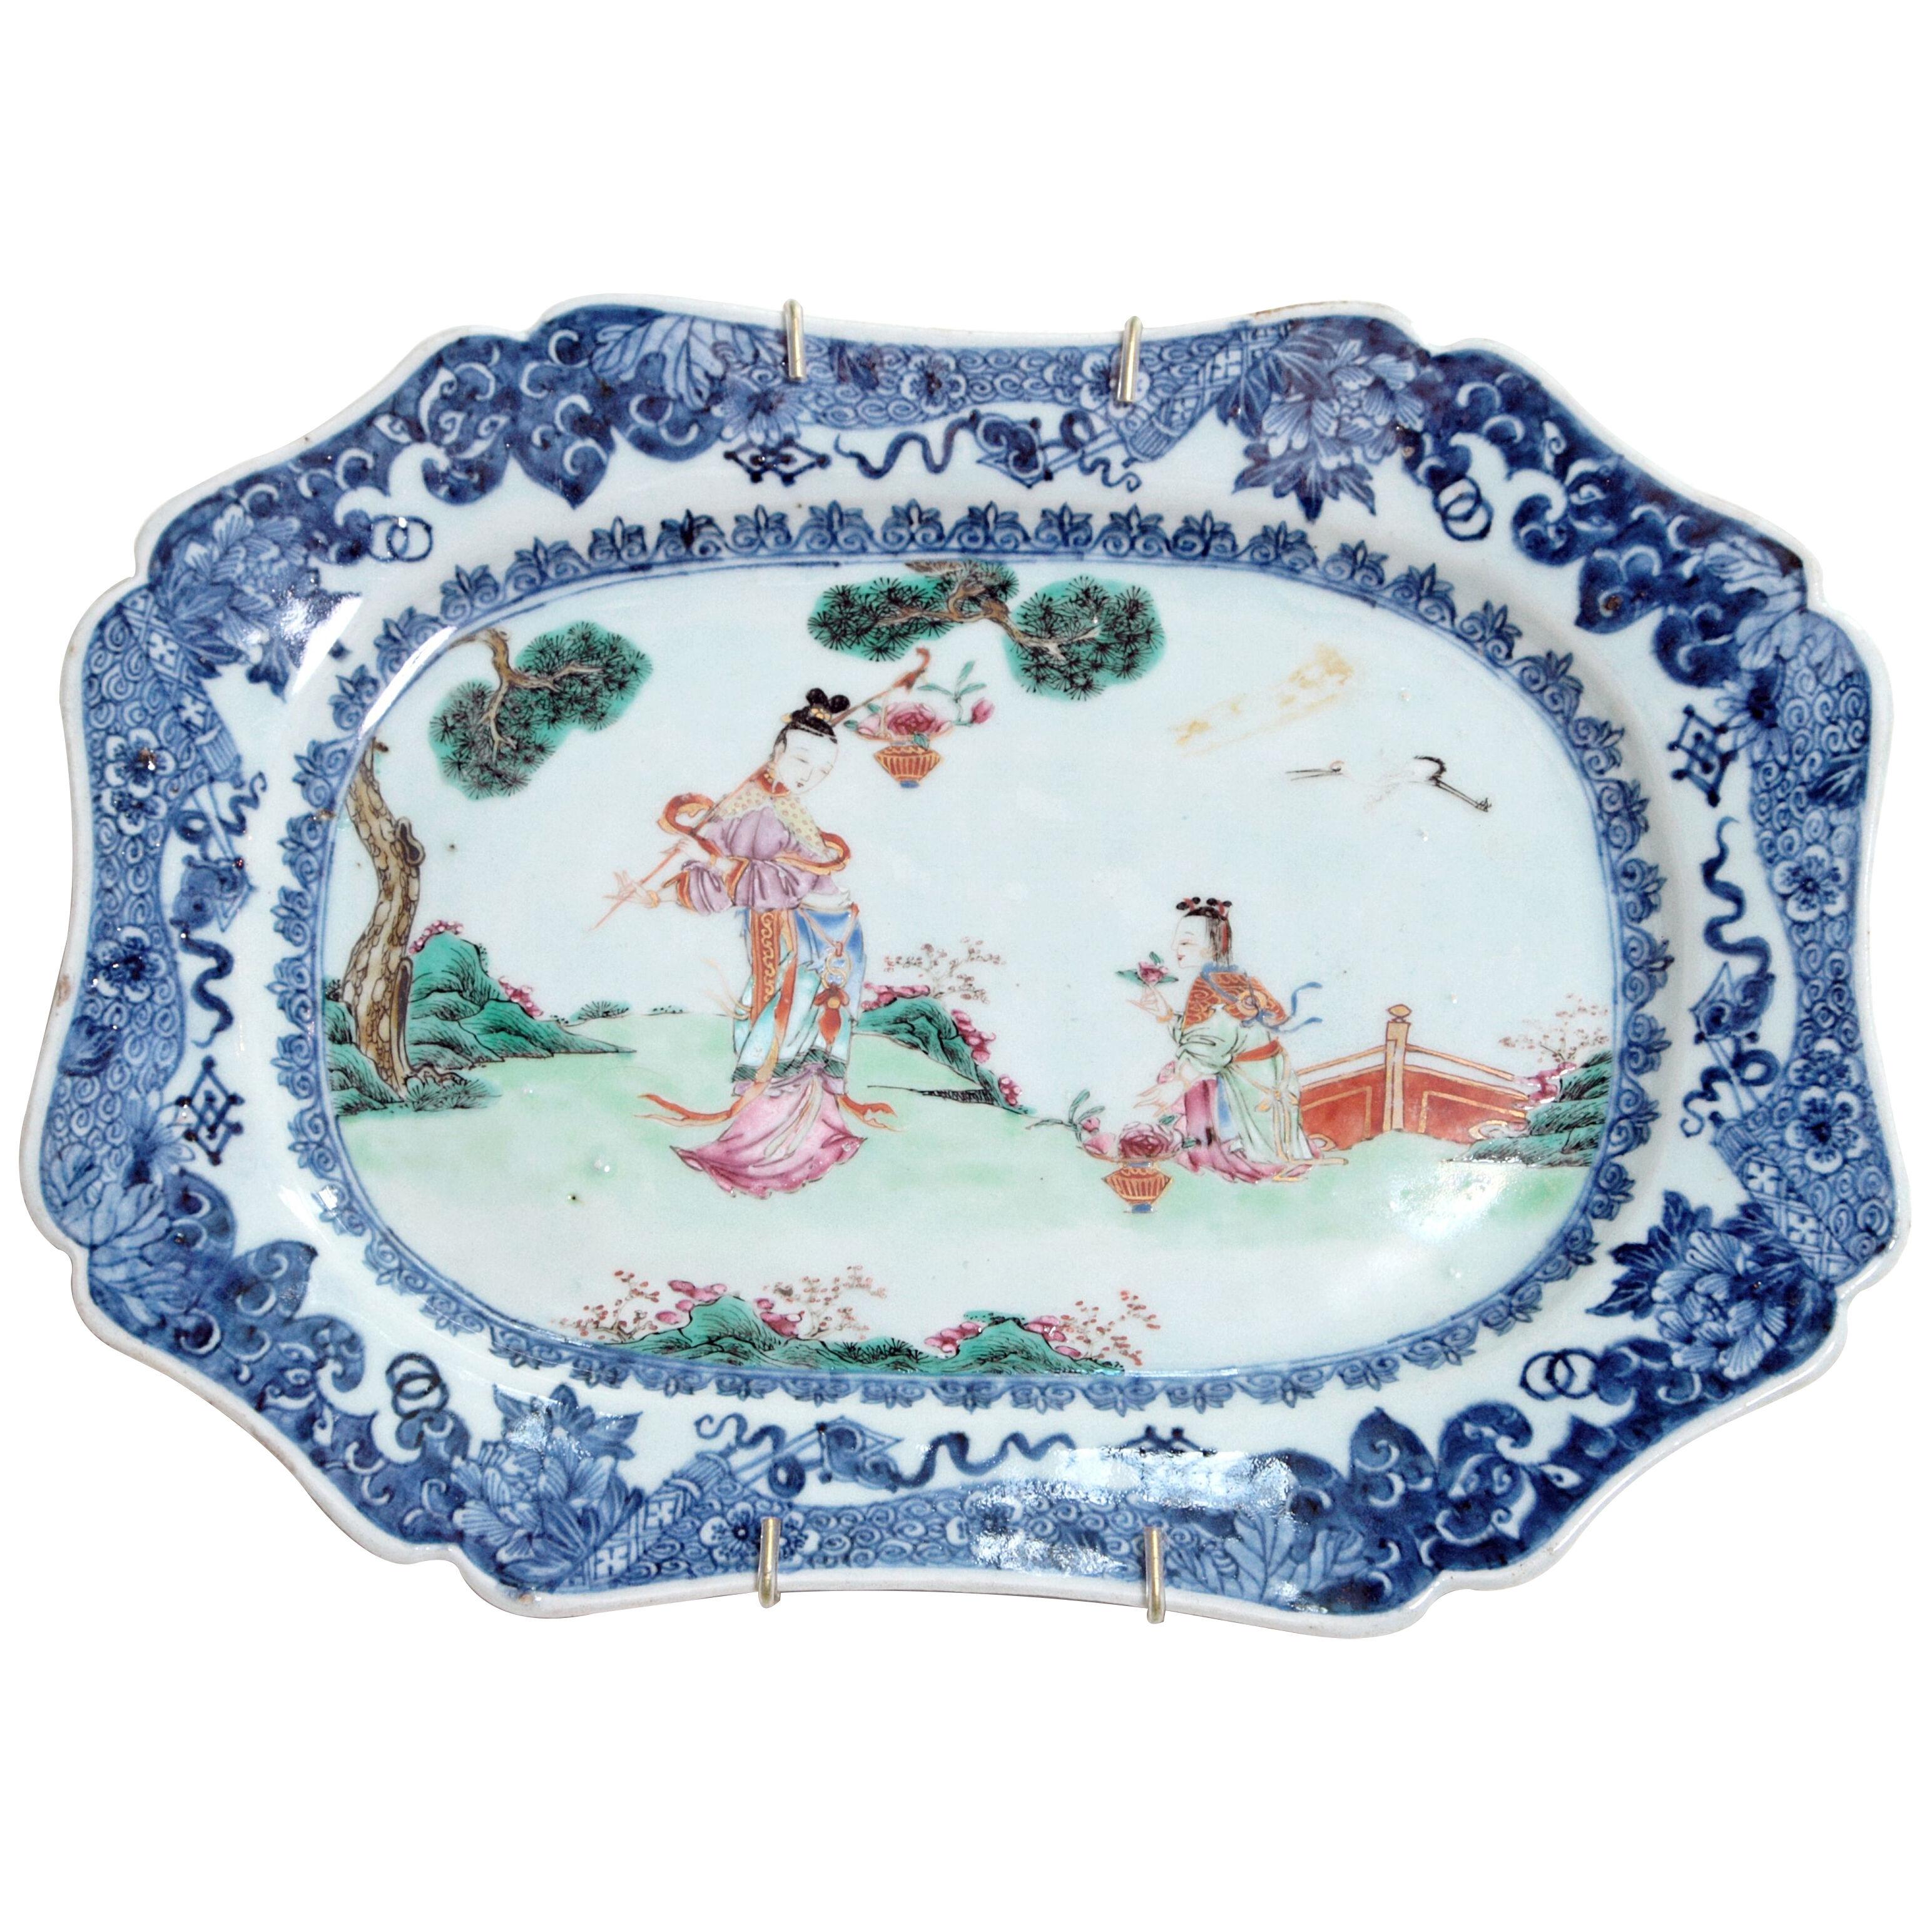 A Medium Size 18th Century Blue and White Chinese Porcelain Platter